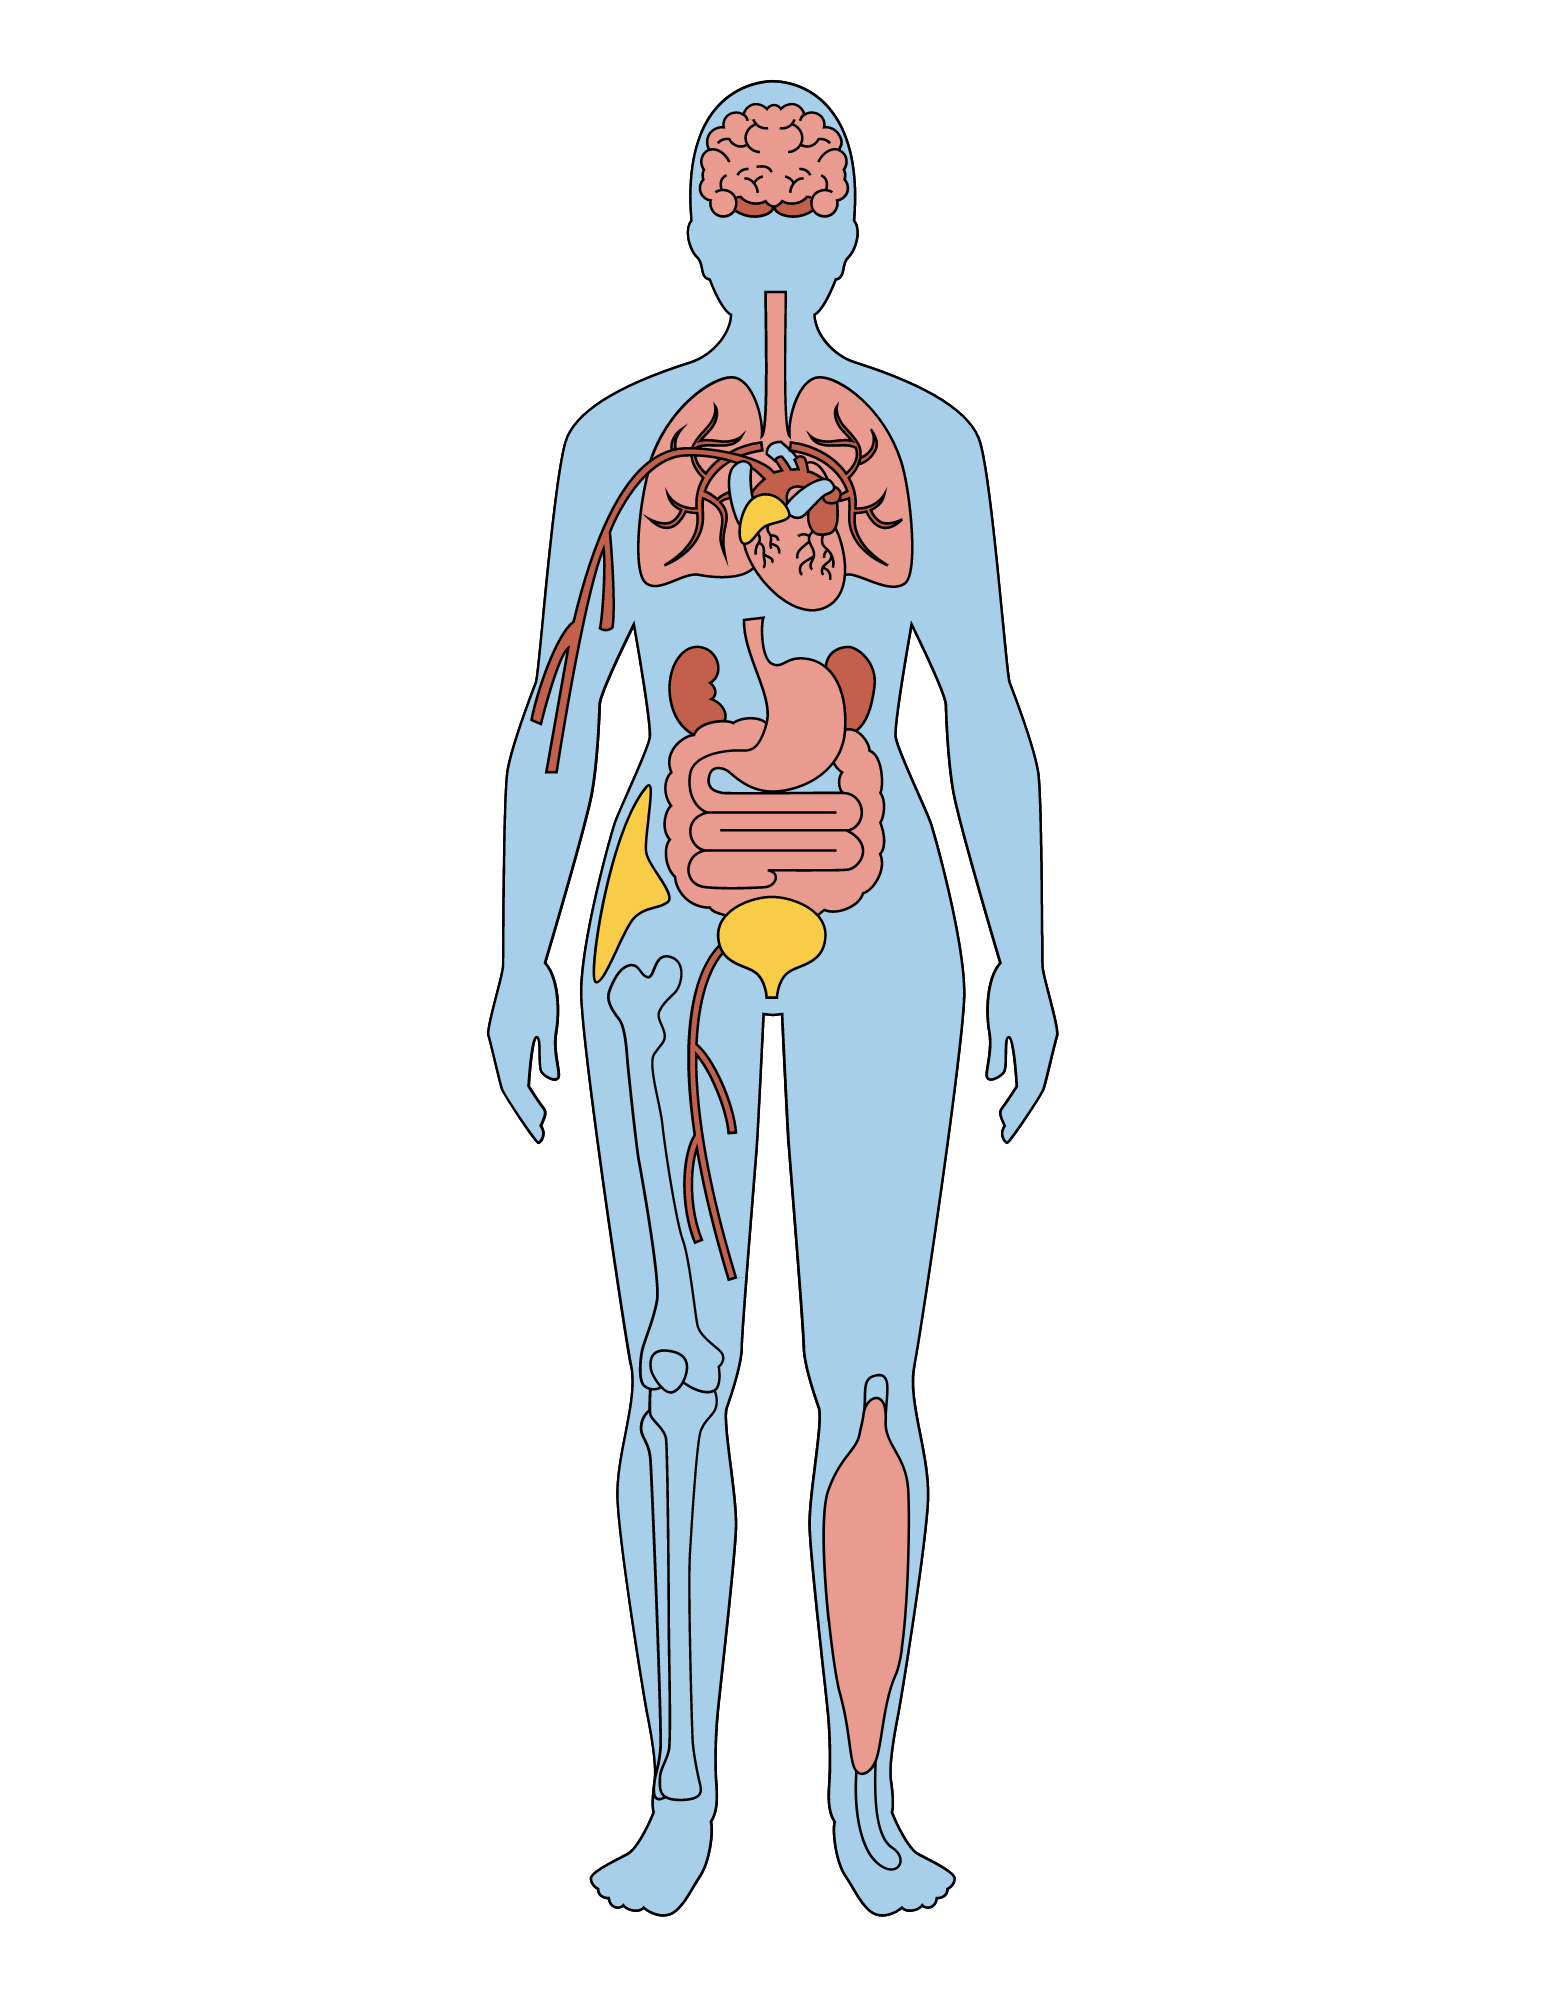 vagus nerve and its influence